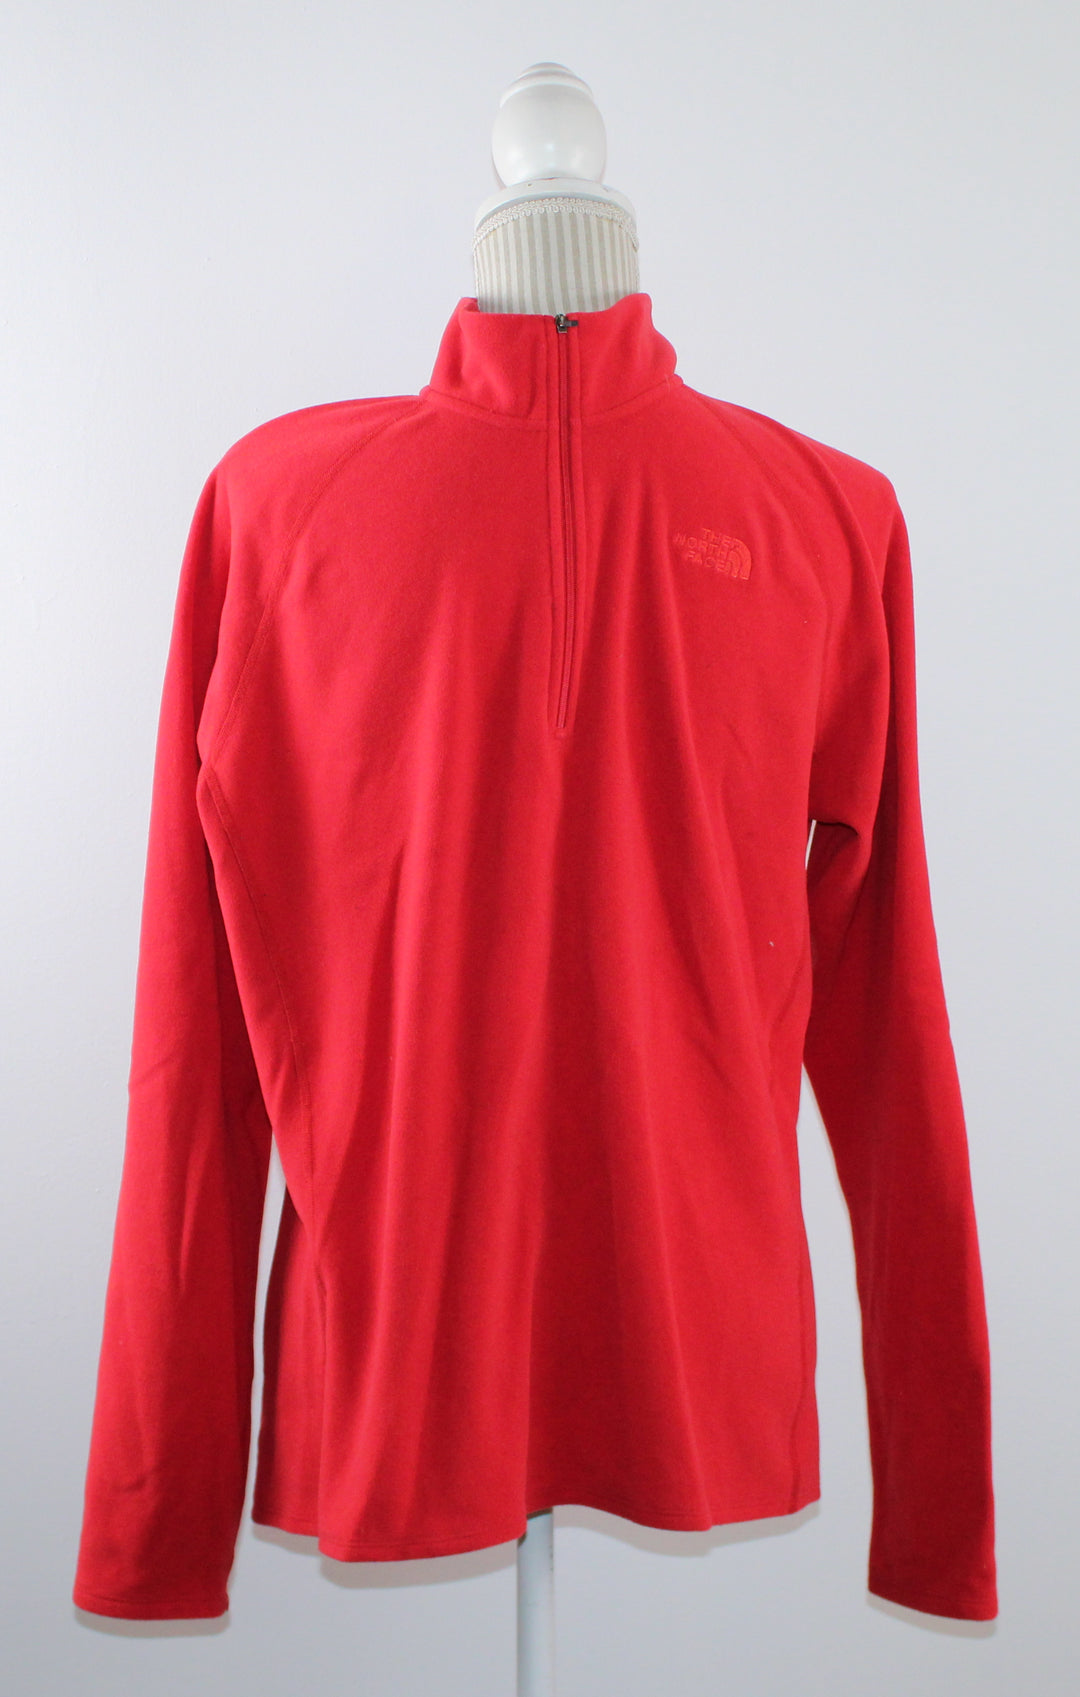 NORTH FACE RED 1/2 SWEATER MENS LARGE EUC